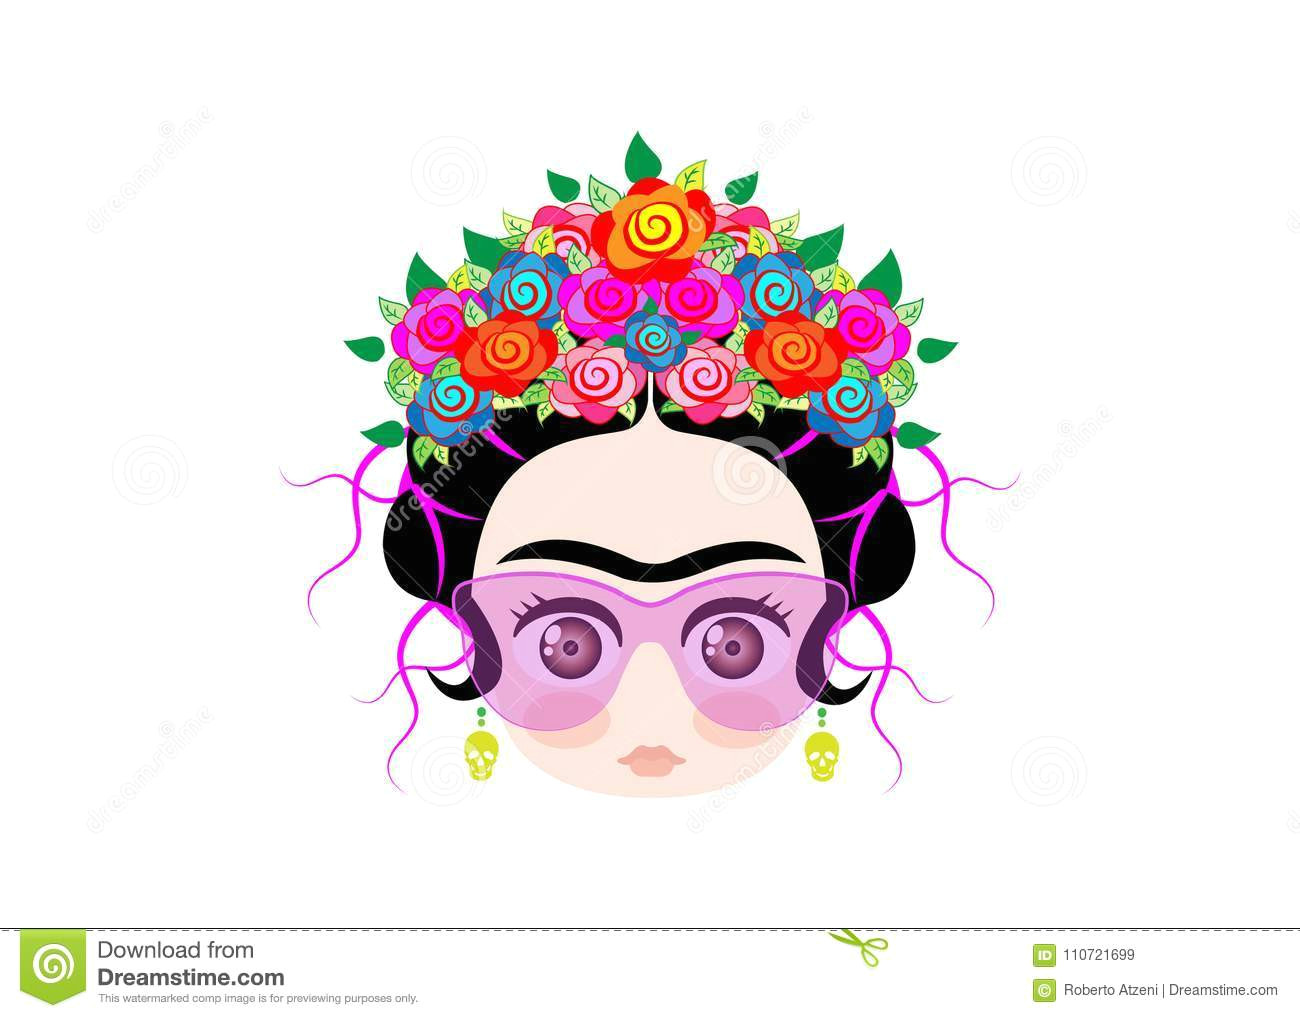 Drawing Flower Emoji Emoji Baby Frida Kahlo with Crown Of Colorful Flowers and Glasses